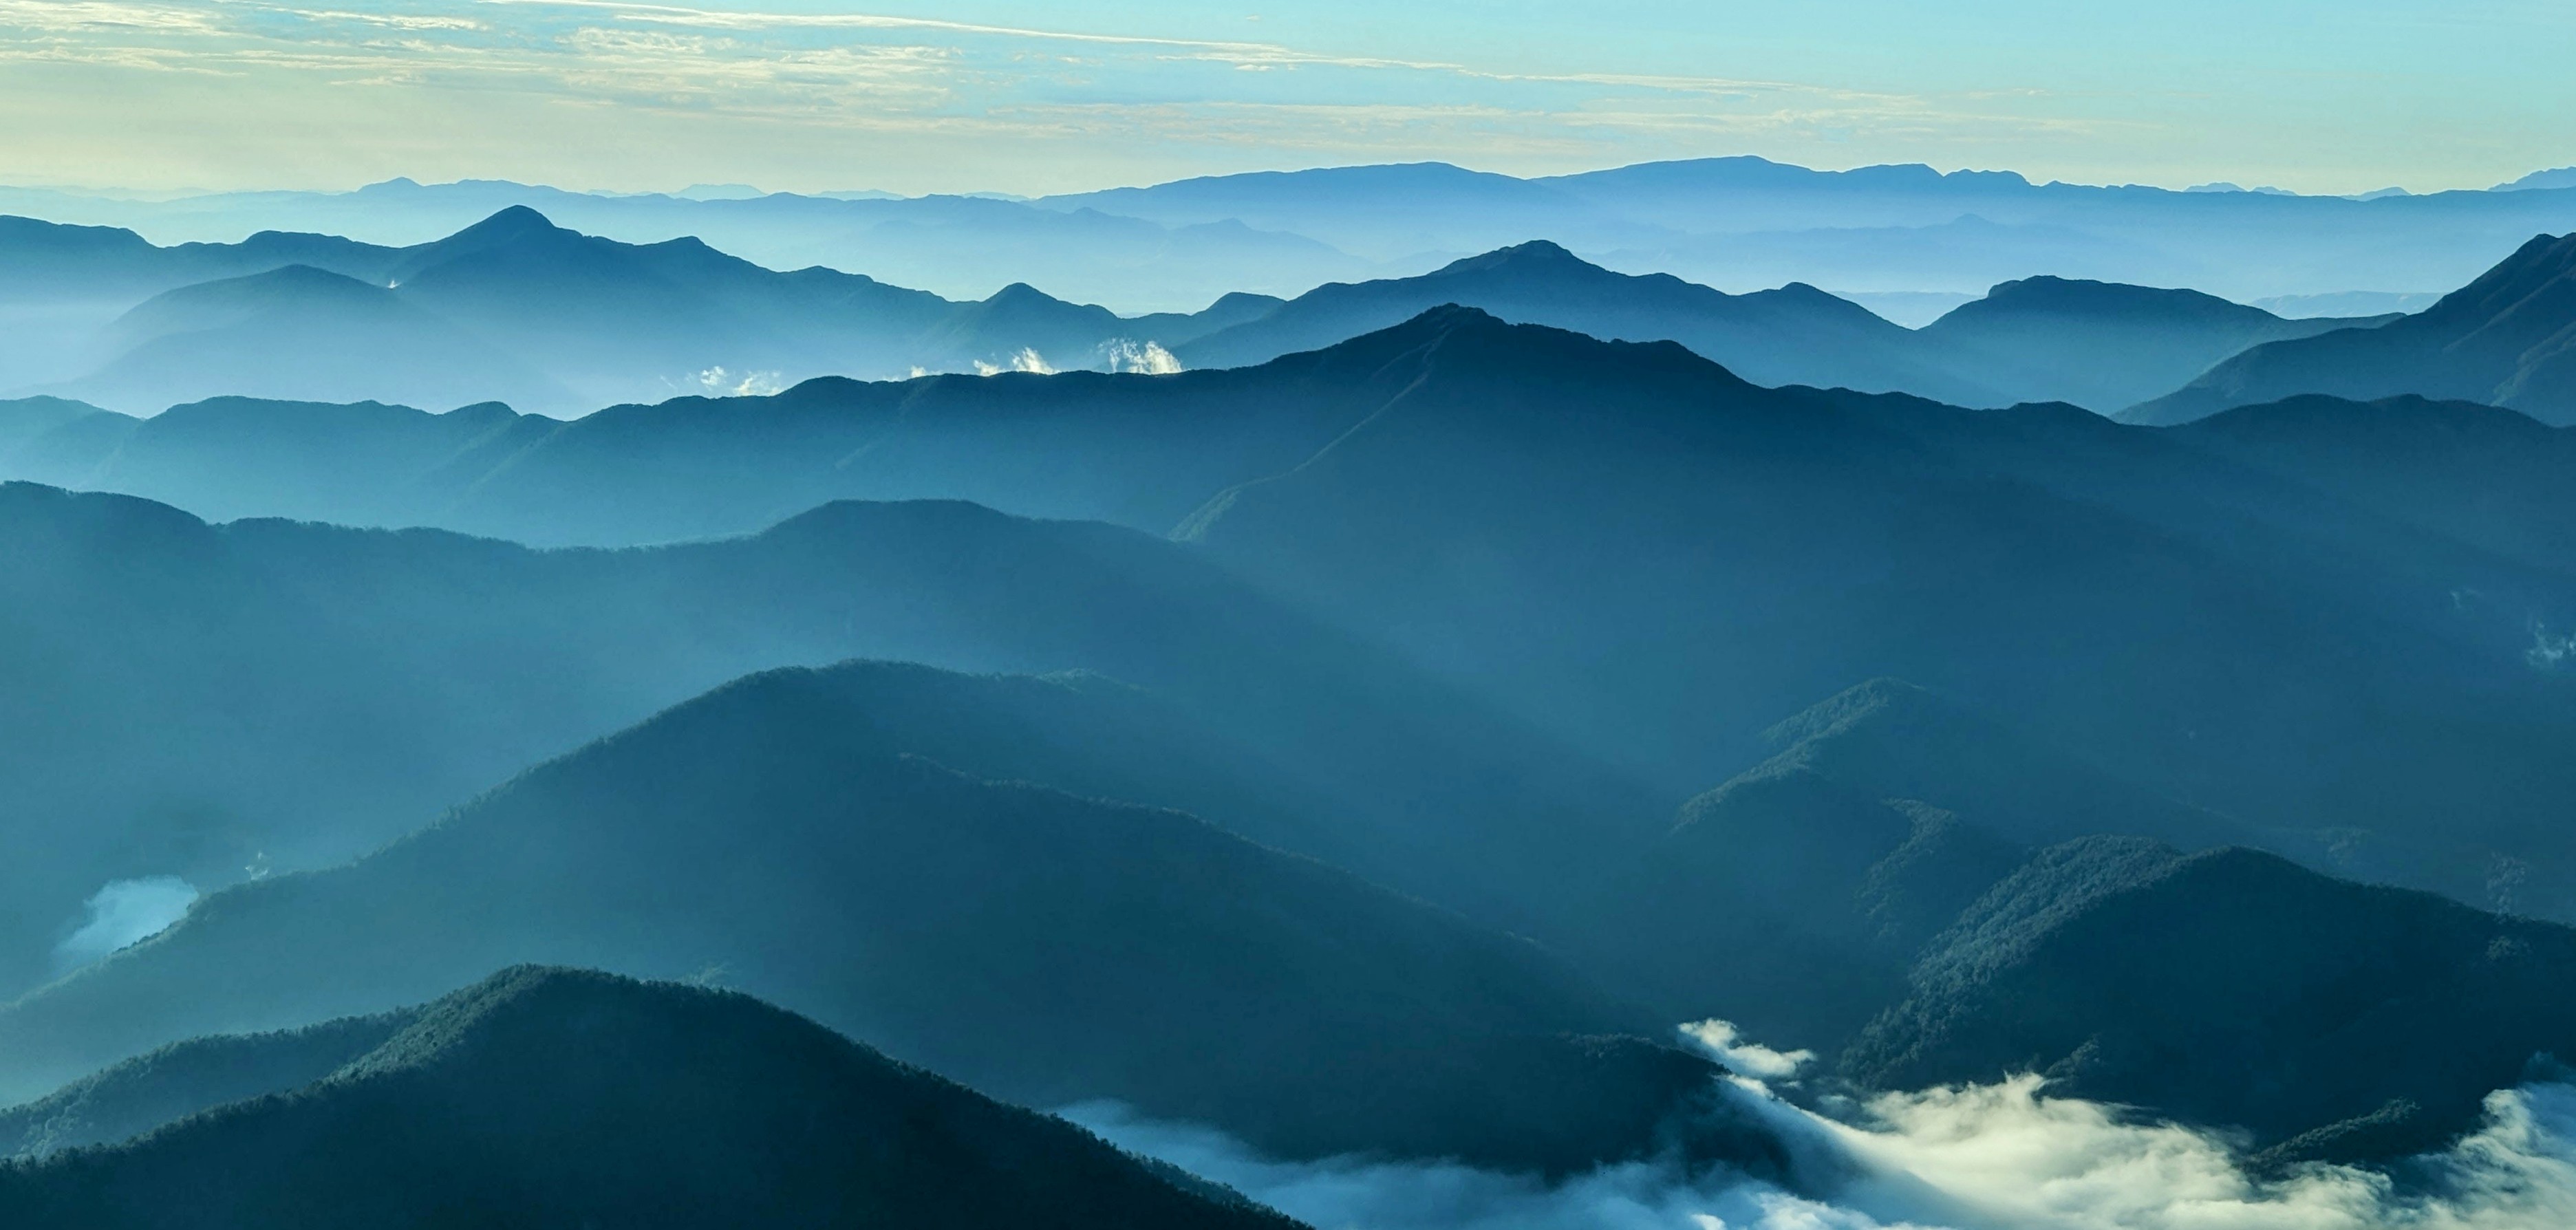 Blue hills fading in the distance of a sunrise with low cloud nestling in the close valleys, all seen from a plane